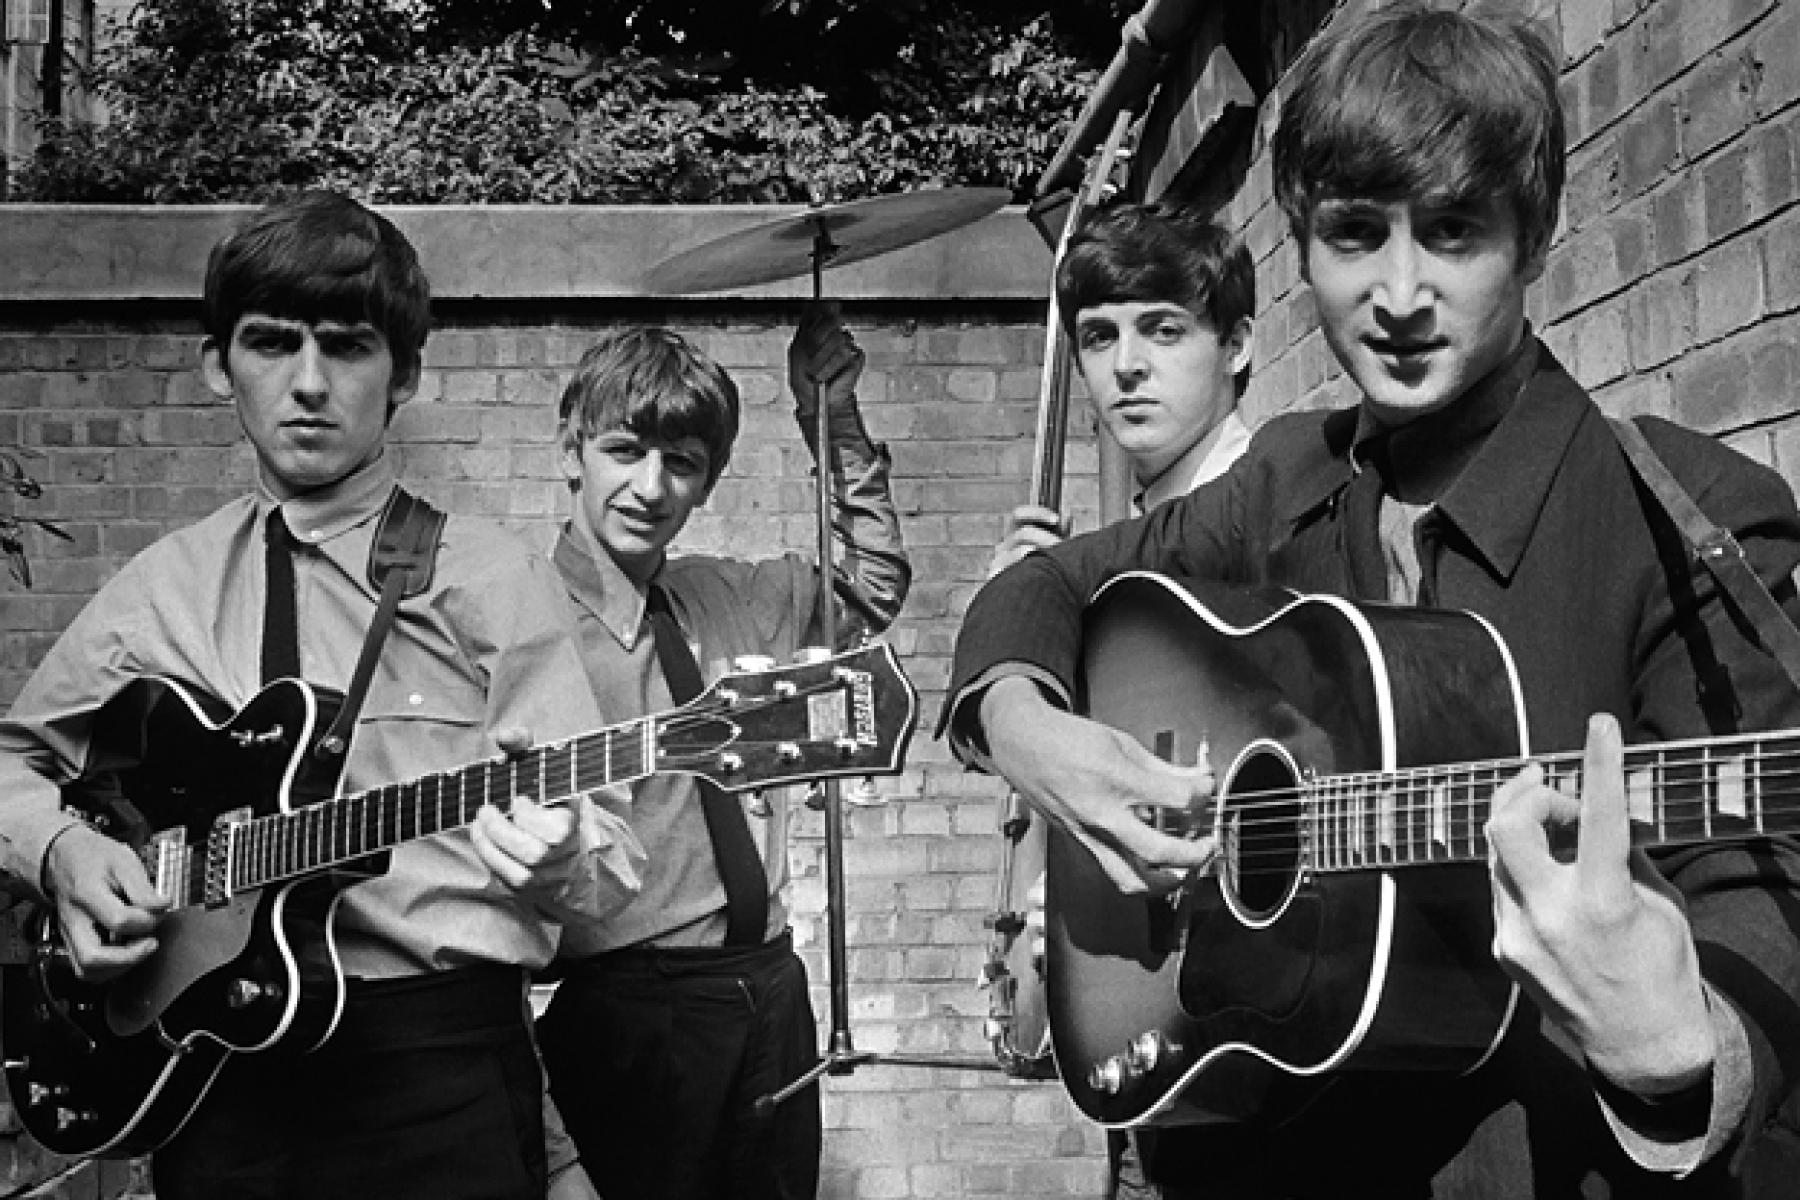 Terry O'Neill
The Beatles, Backyard of Abbey Road Studios
1963 (printed later)
Silver gelatin print
signed and numbered edition 47 of 50
with certificate of authenticity

Terry O'Neill CBE (born 1938-2019; London, UK) is an English photographer. He